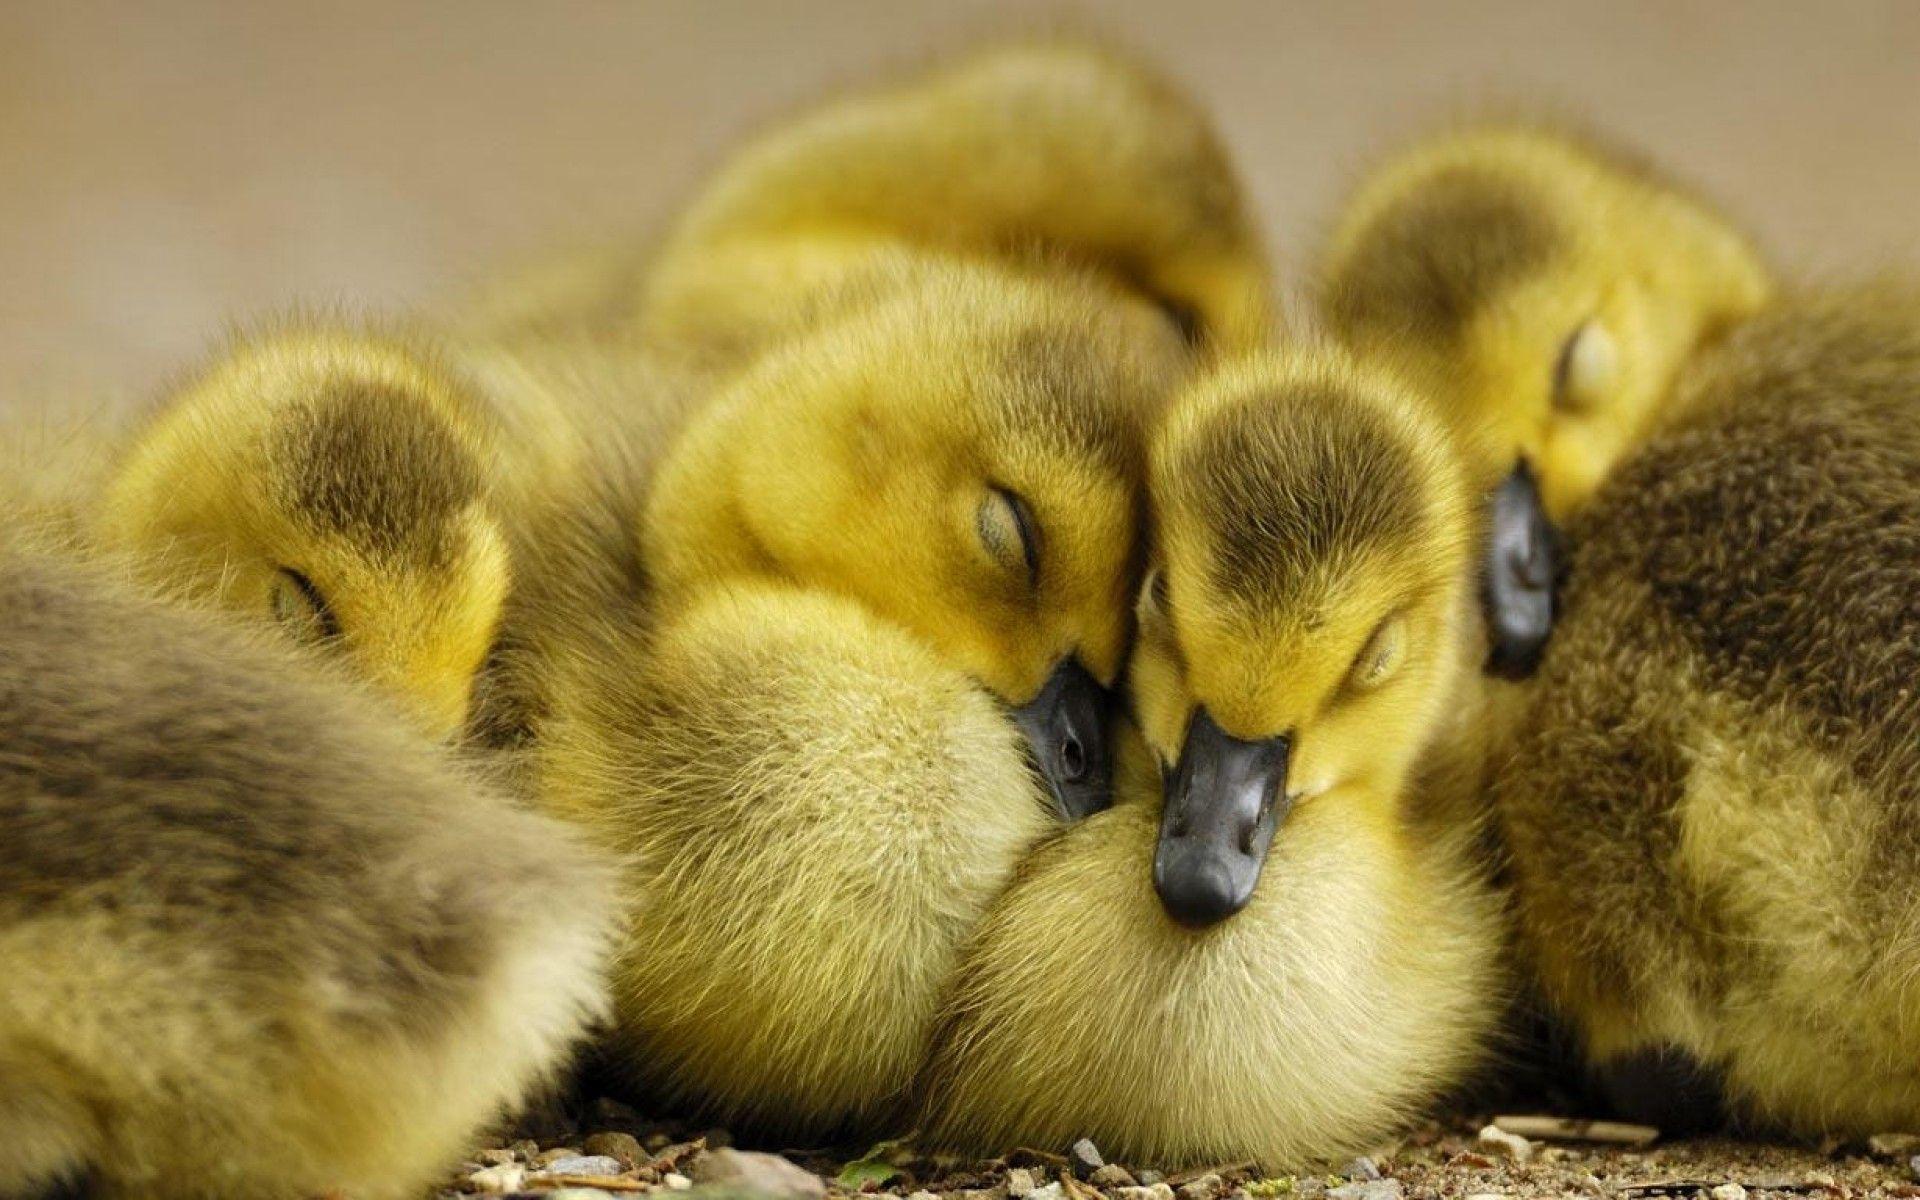 Cute Duckling Wallpapers 35829 1920x1200 px